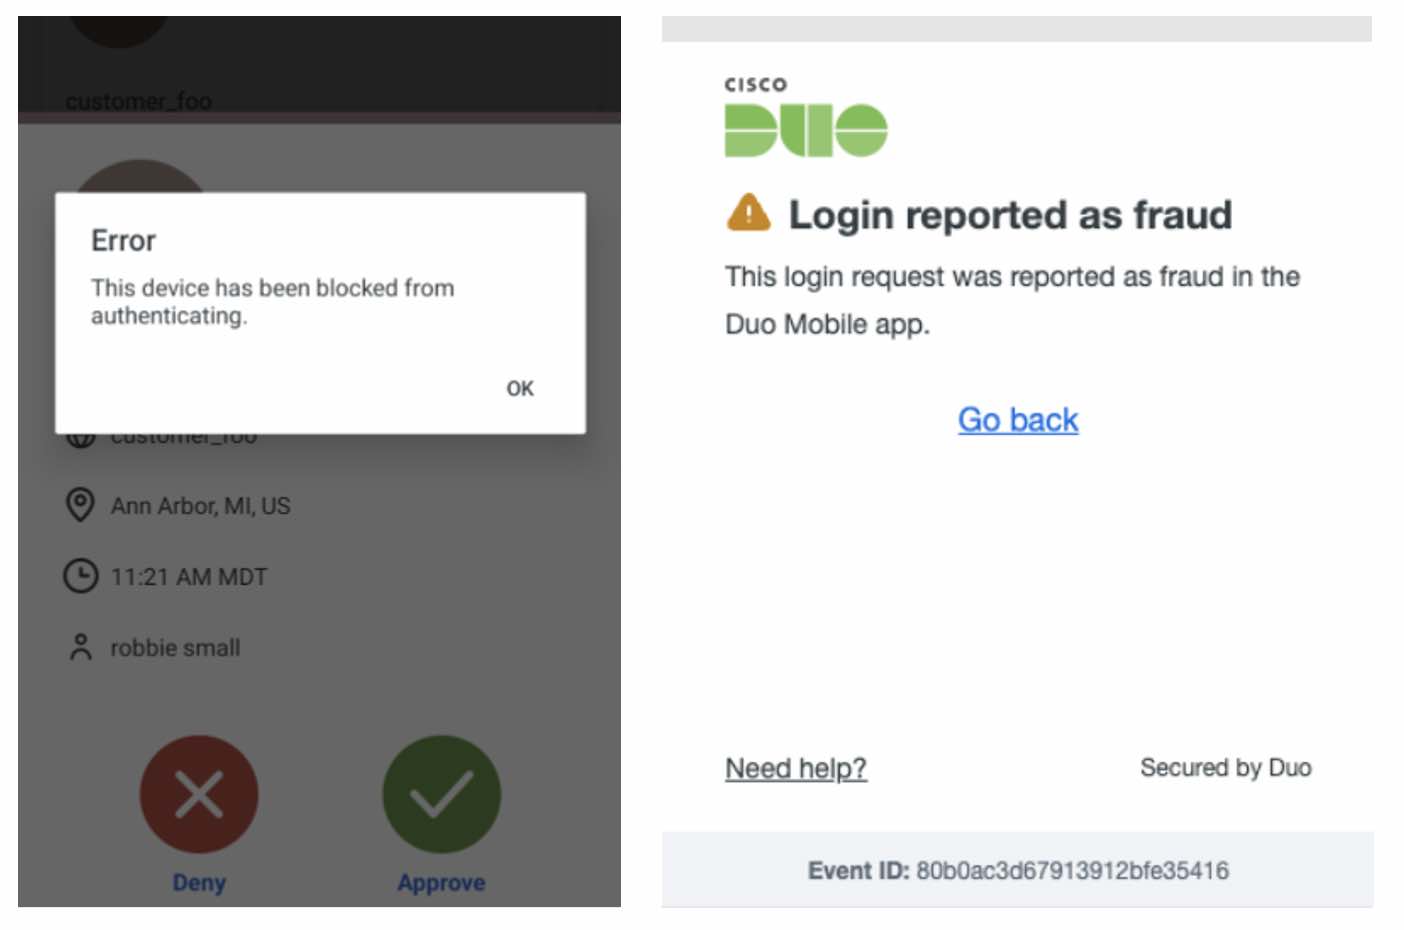 Screenshots of a device being blocked from authenticating as the login is reported as a fraud